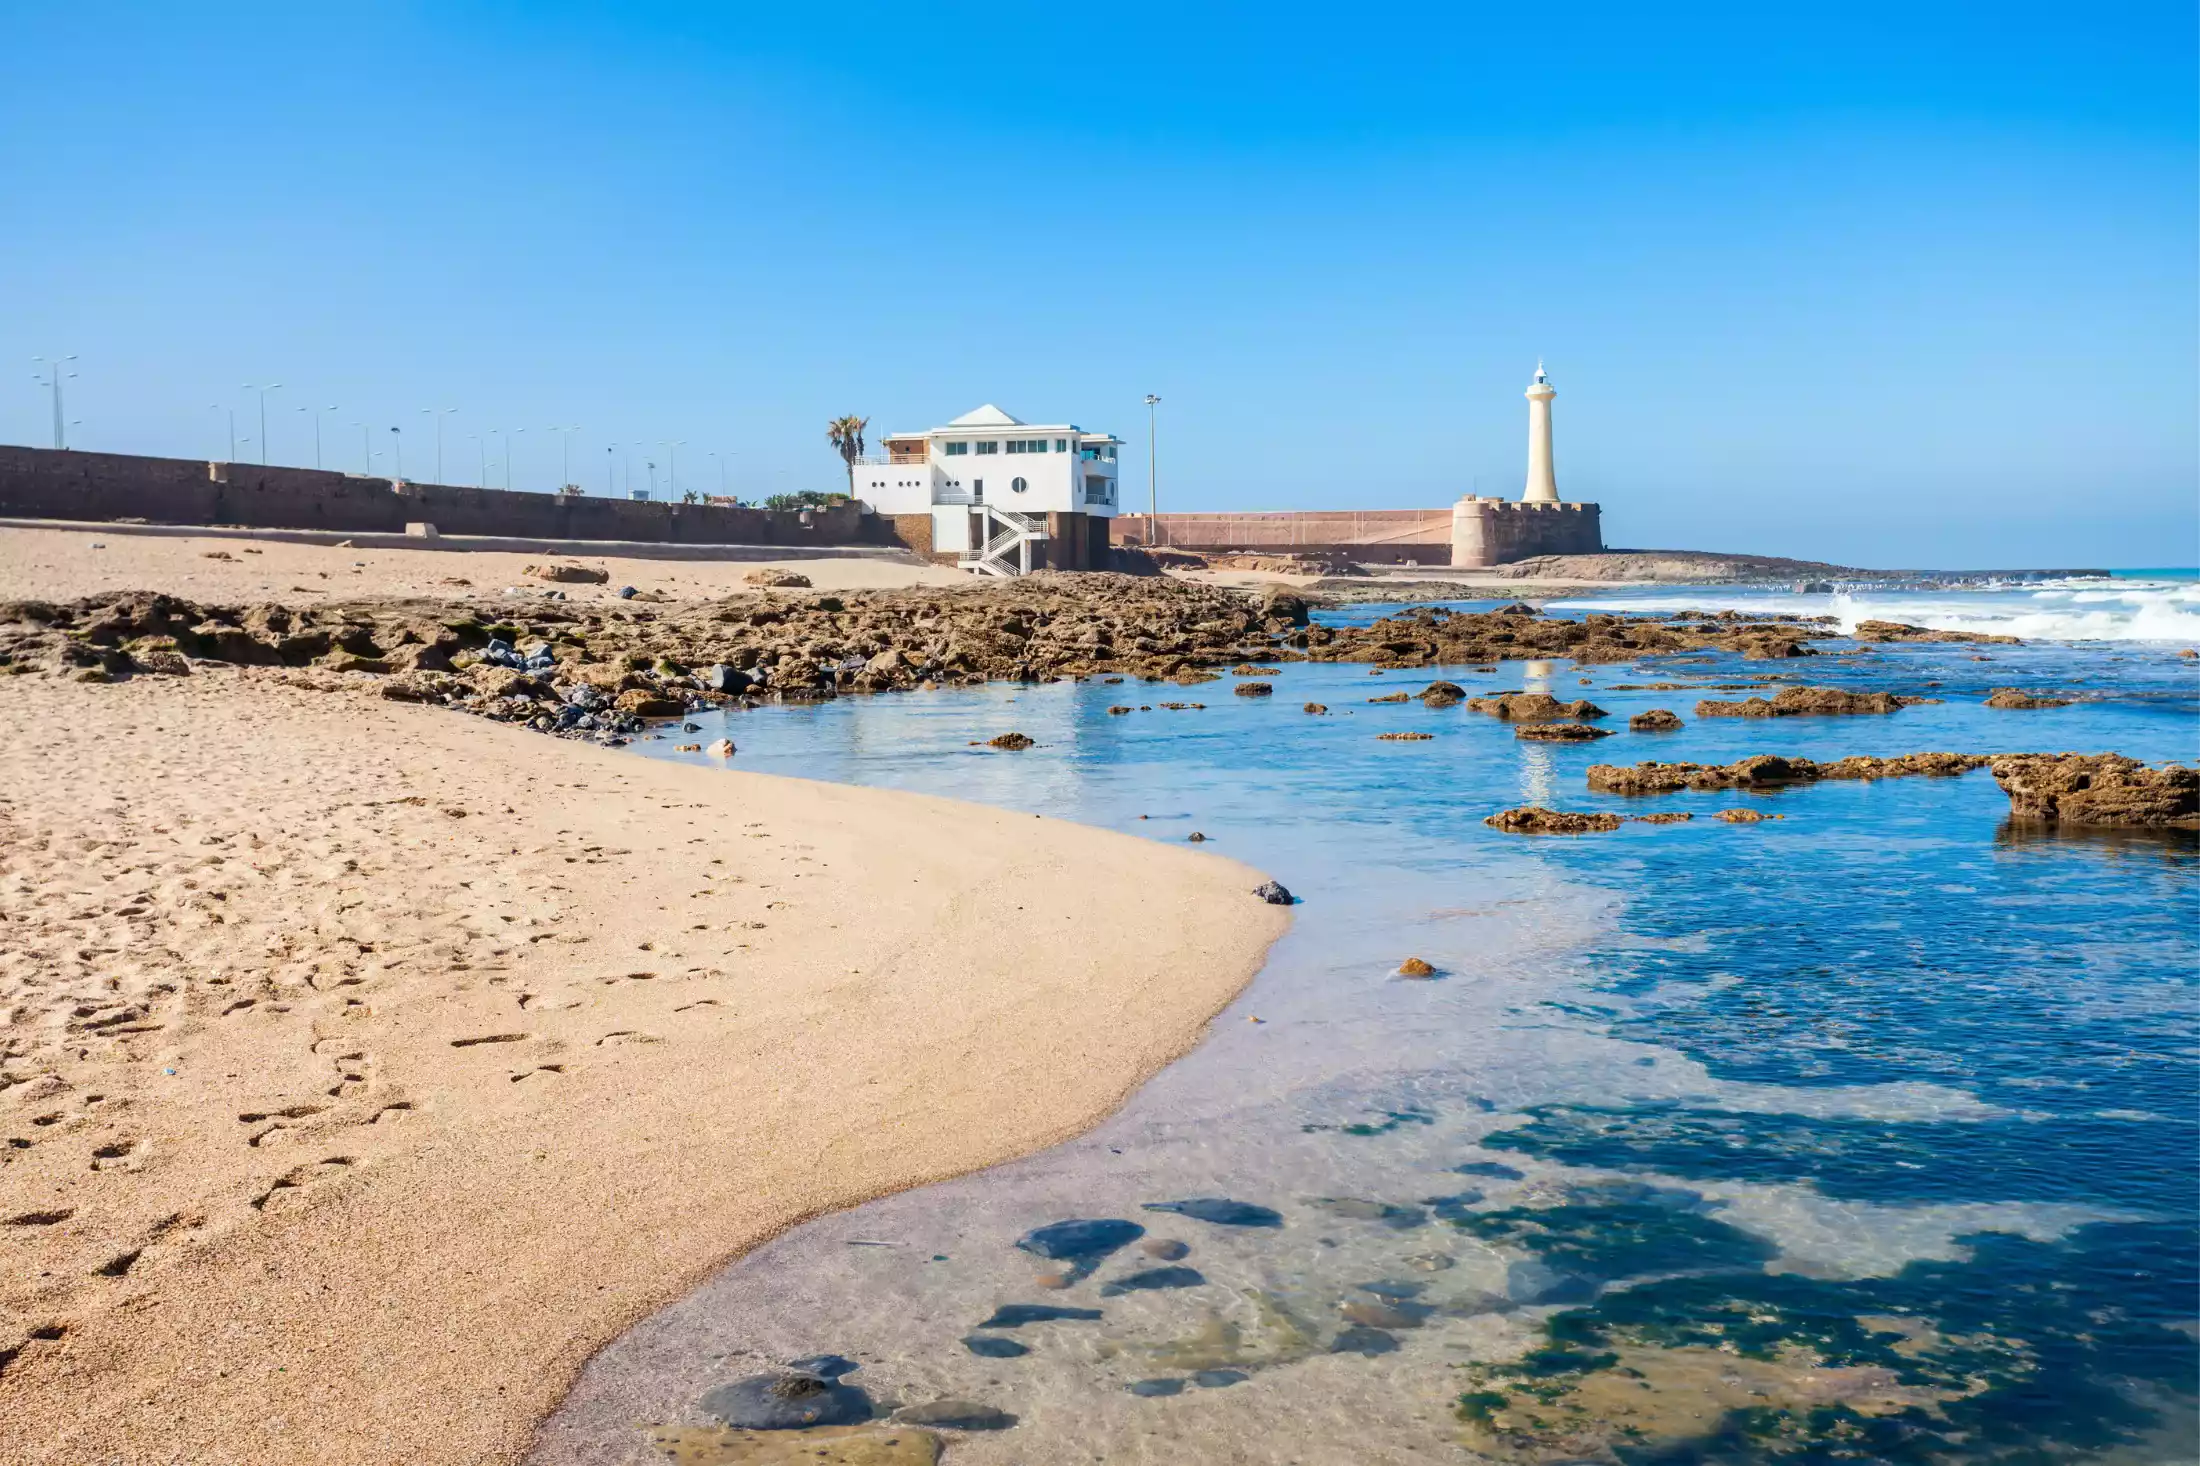 Lighthouse located near the Kasbah, in Rabat in Morocco.